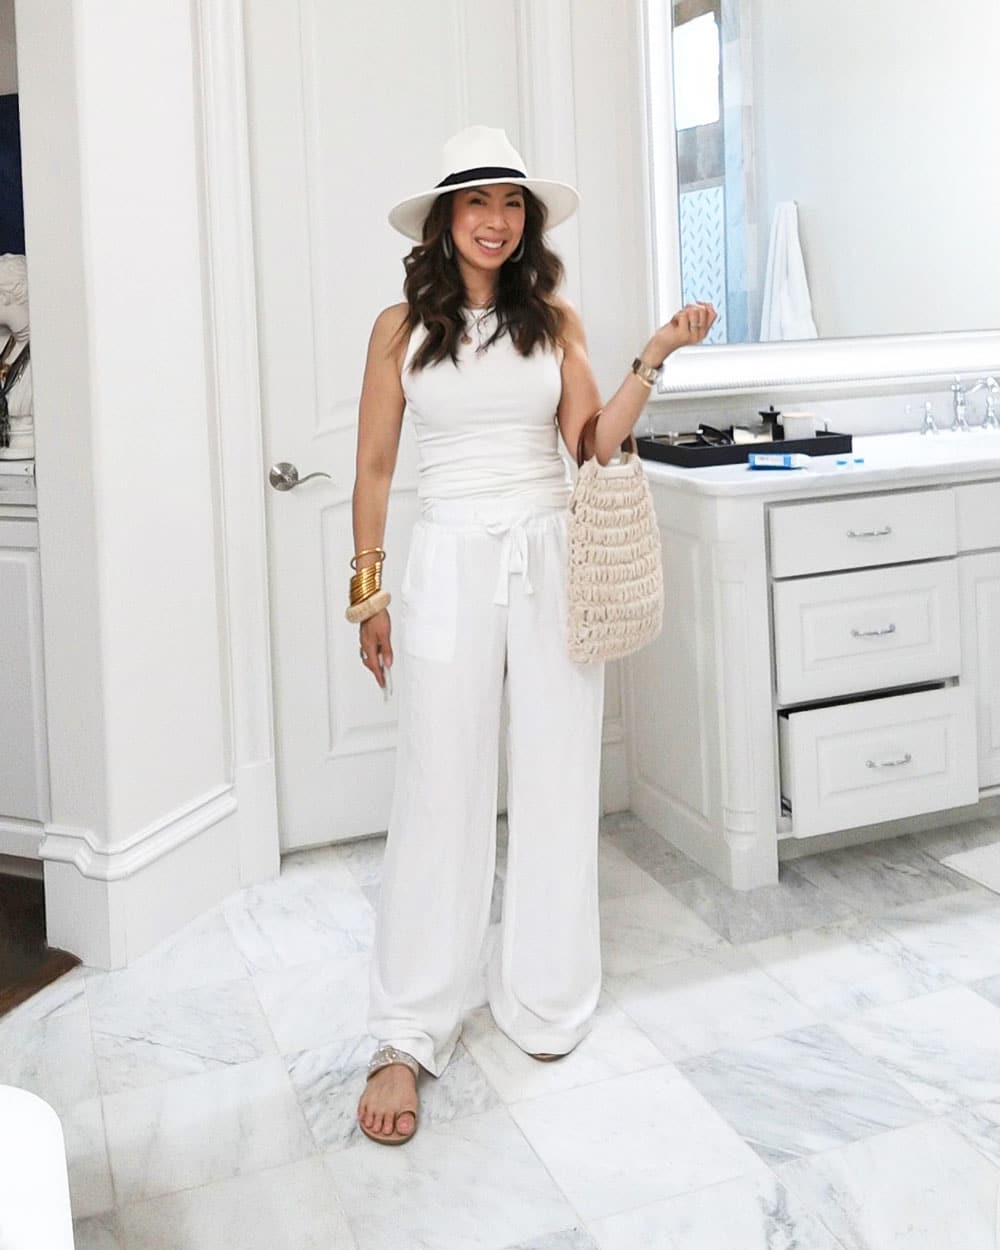 style of sam in white target tank top, linen pants, and hat